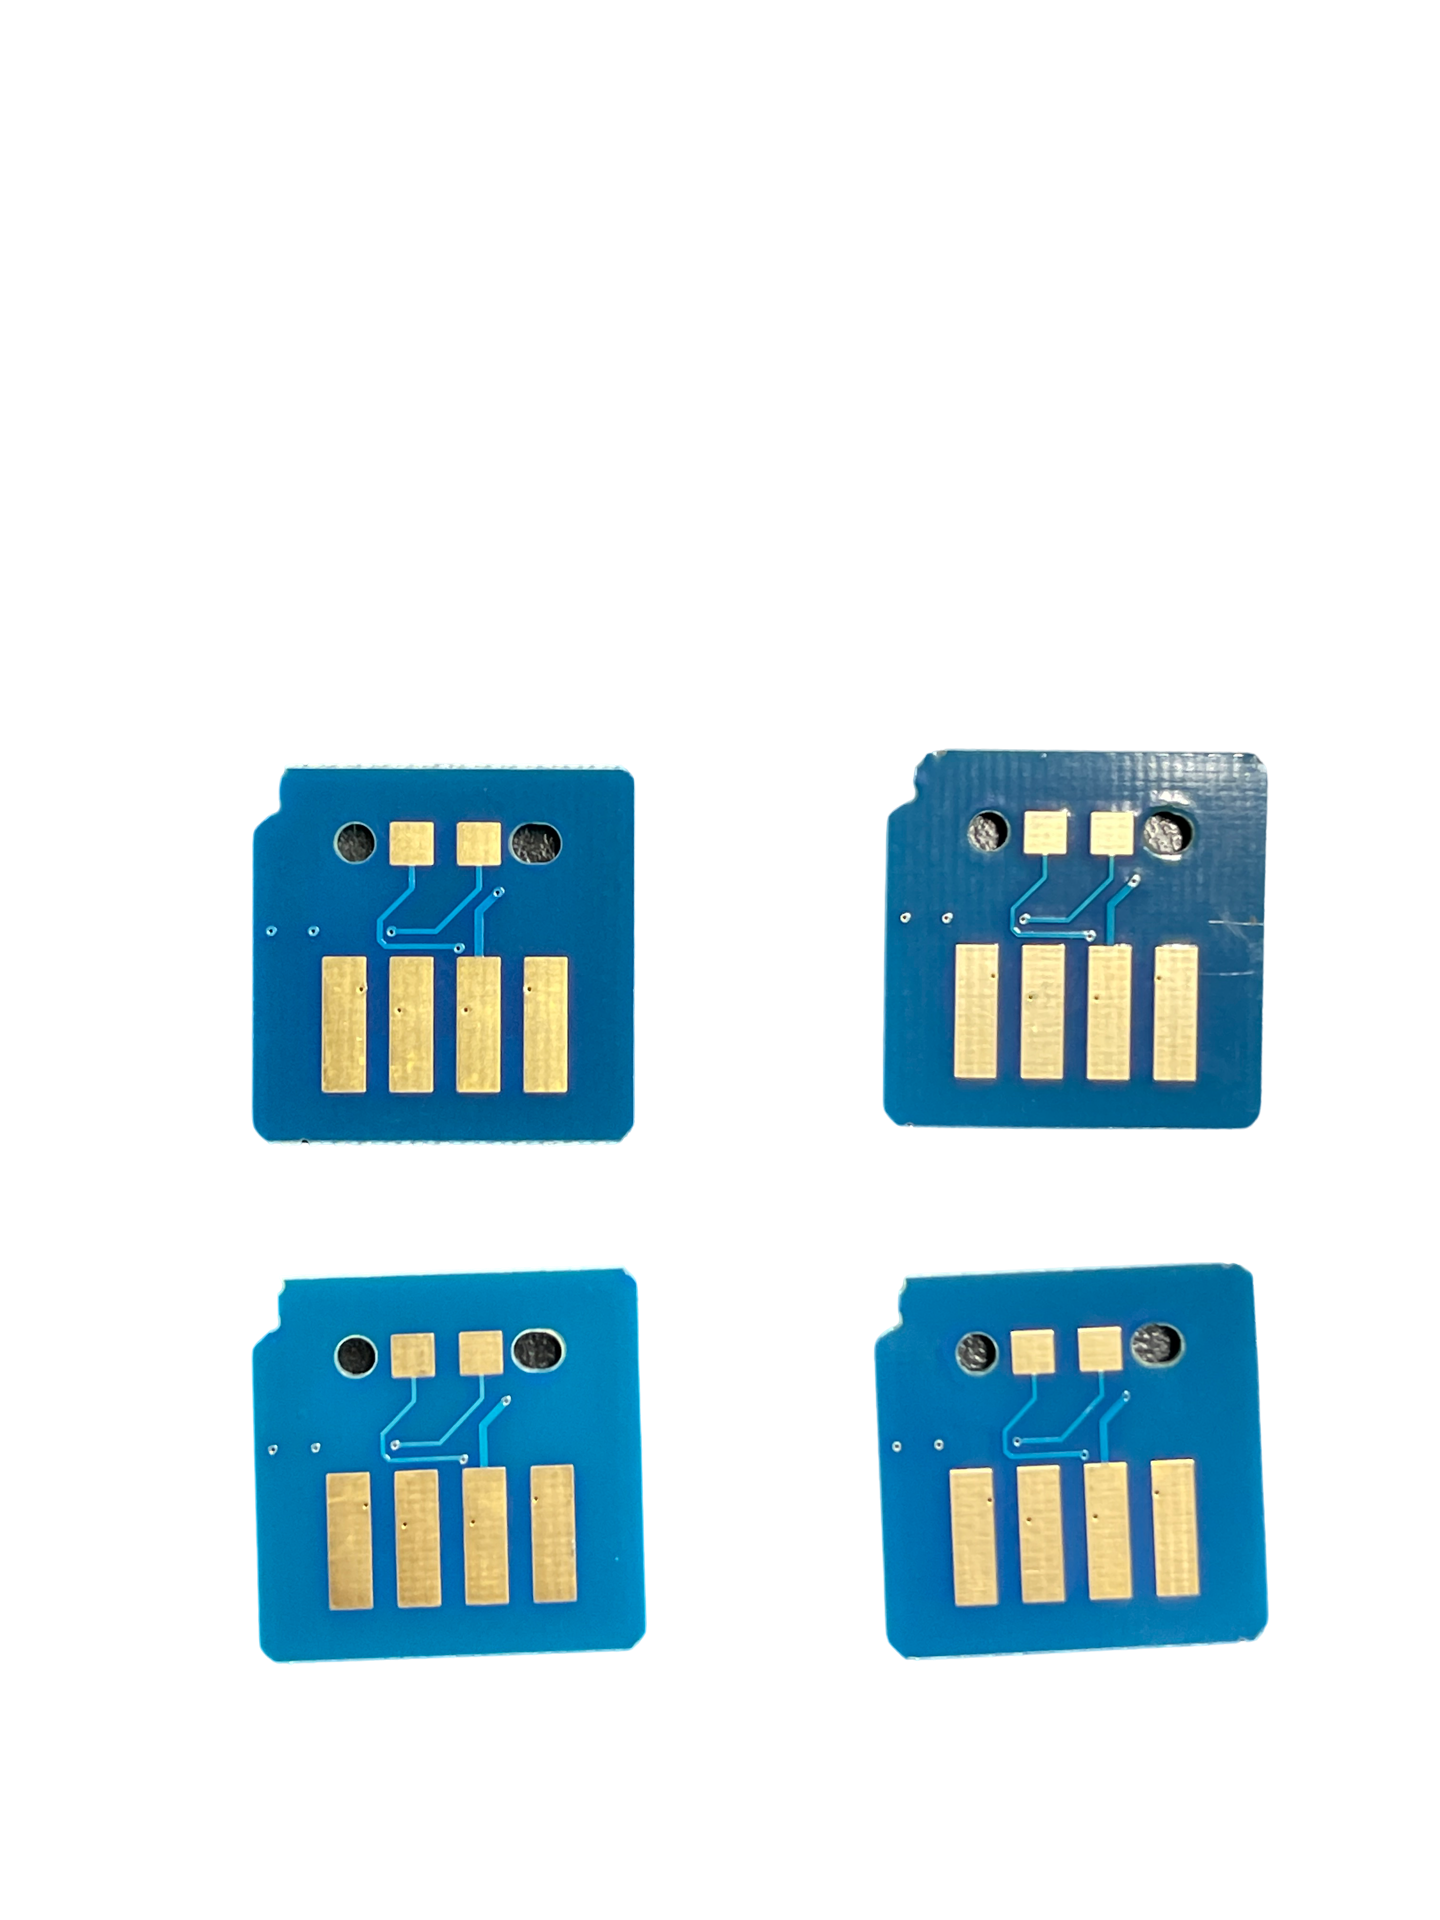 4 x Toner Chip for Xerox WorkCentre 7525 7830 7835 7840 7855 006R01509 006R01512